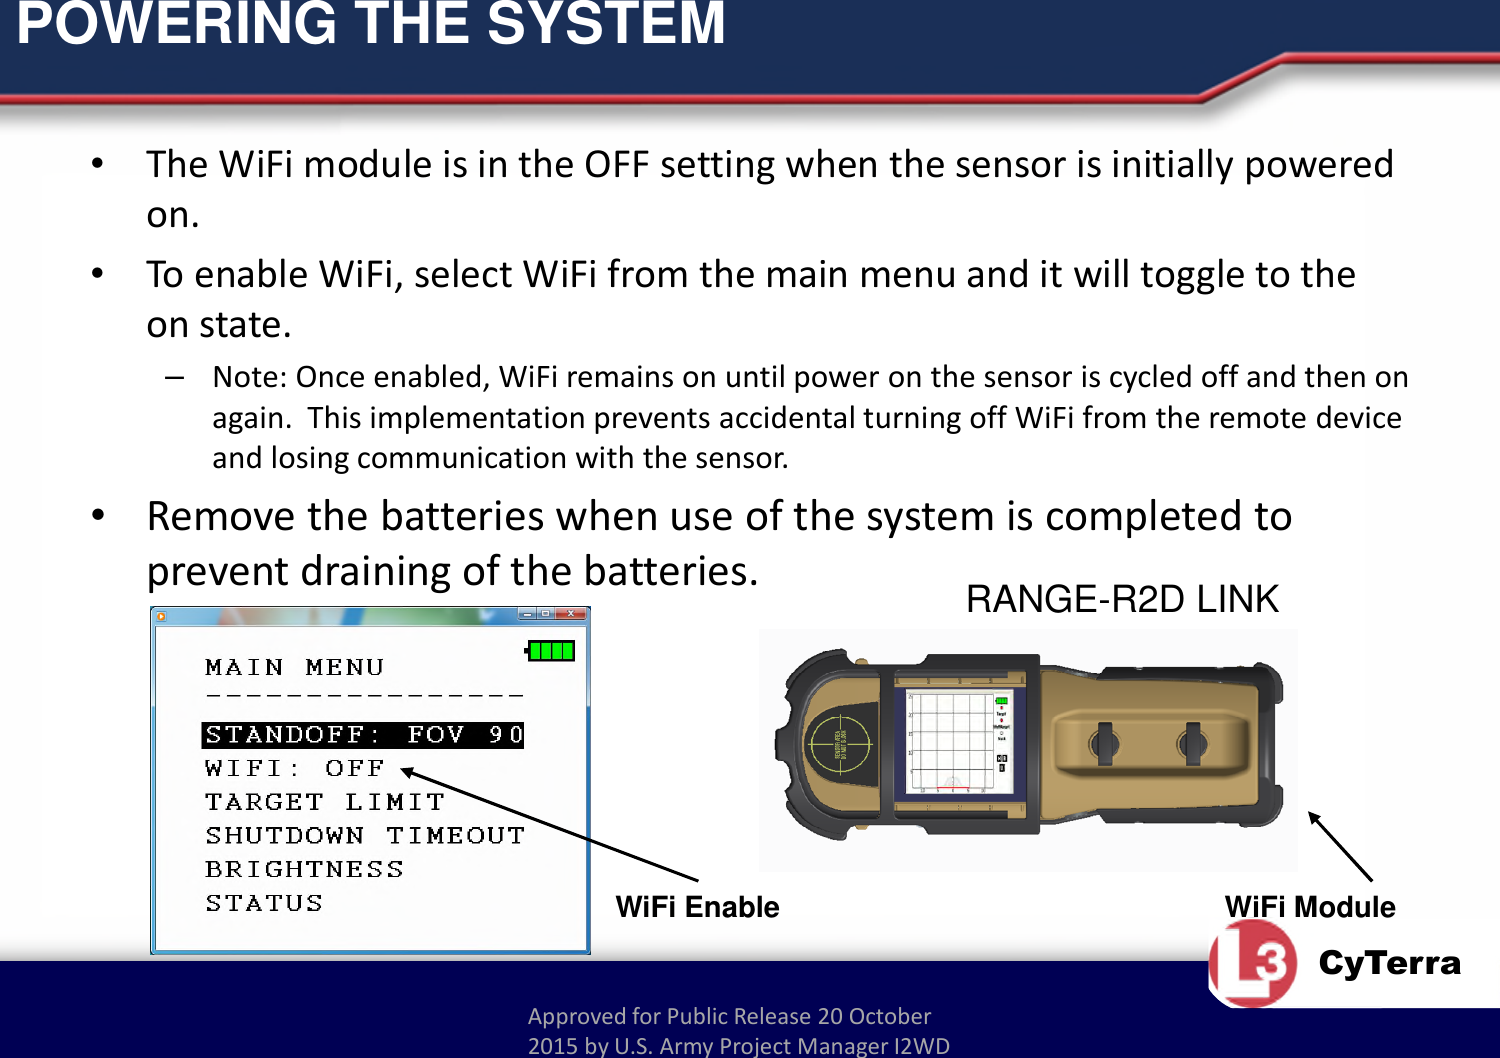 Approved for Public Release 20 October 2015 by U.S. Army Project Manager I2WDCyTerraPOWERING THE SYSTEM•The WiFi module is in the OFF setting when the sensor is initially powered on.•To enable WiFi, select WiFi from the main menu and it will toggle to the on state.–Note: Once enabled, WiFi remains on until power on the sensor is cycled off and then on again.  This implementation prevents accidental turning off WiFi from the remote device and losing communication with the sensor.•Remove the batteries when use of the system is completed to prevent draining of the batteries.WiFi ModuleRANGE-R2D LINKWiFi Enable